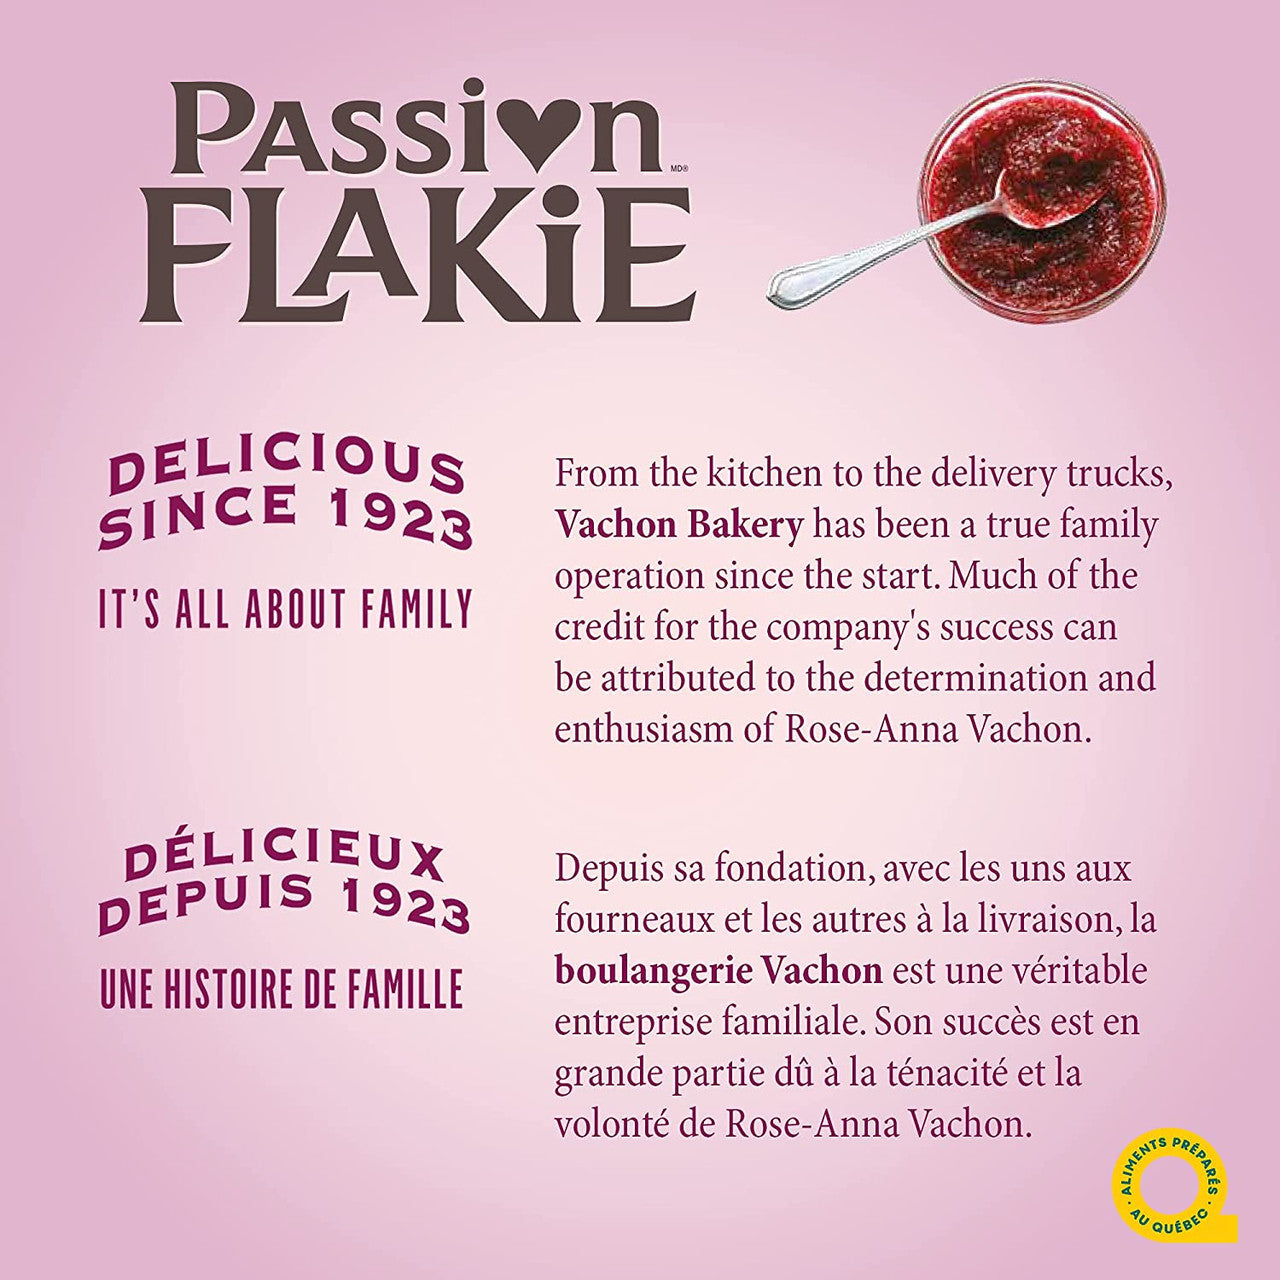 Vachon Passion Flakie Pastries Three Fruits 305g/10.8oz,  {Imported from Canada}